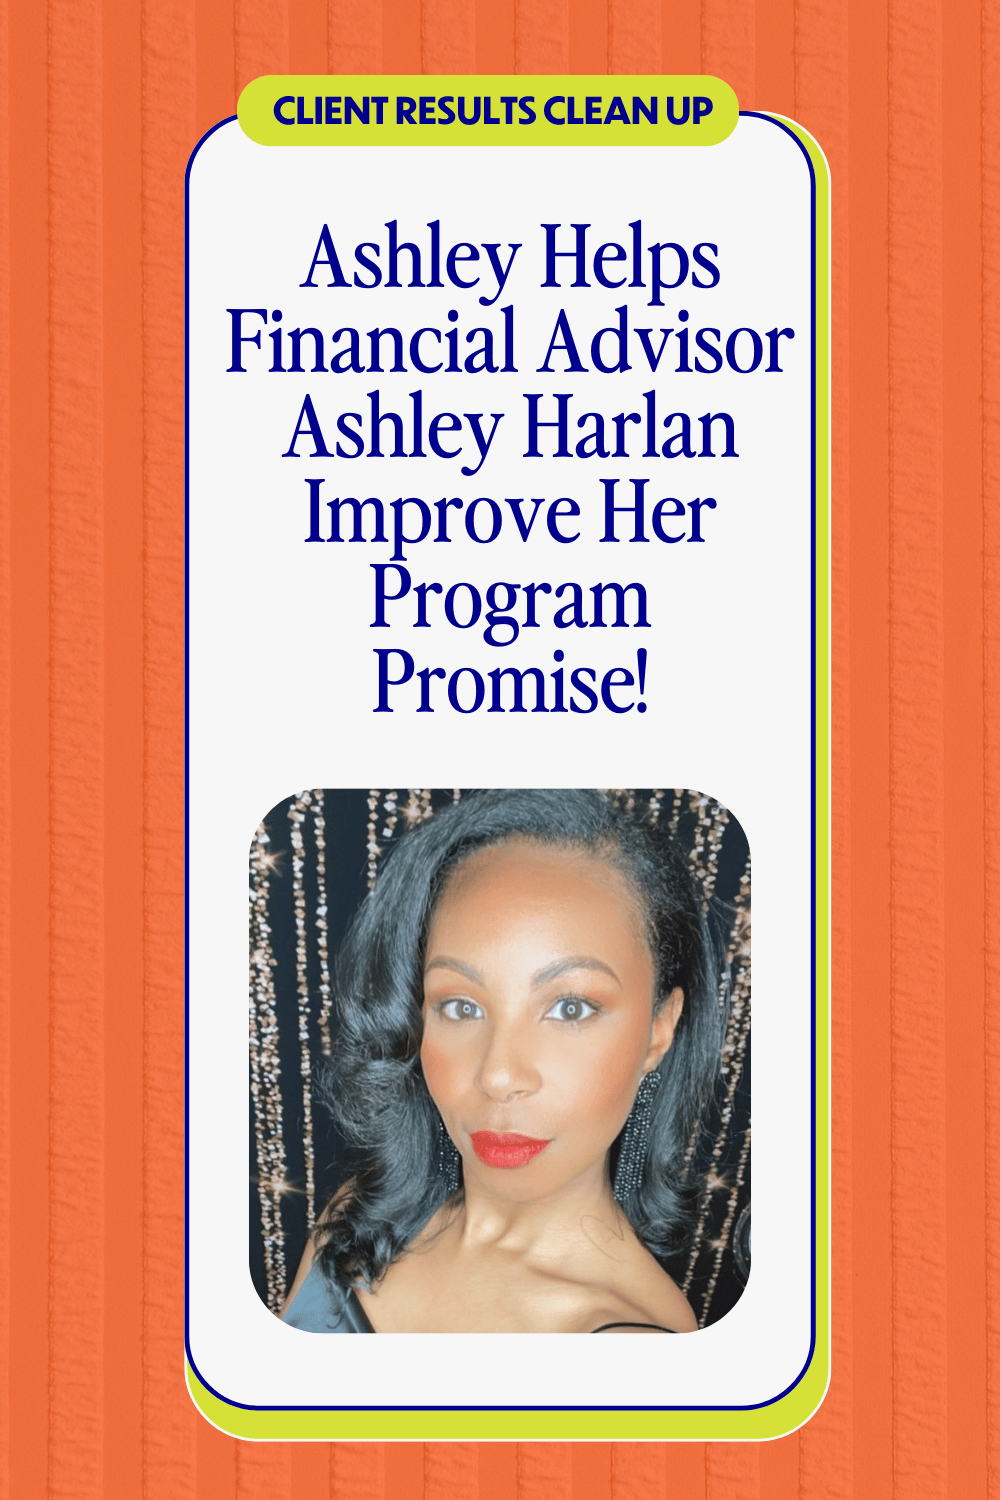 Financial Advisor Ashley Harlan posing in front of a decorative background, featured in "Ashley Helps Financial Advisor Ashley Harlan Improve Her Program Promise!"